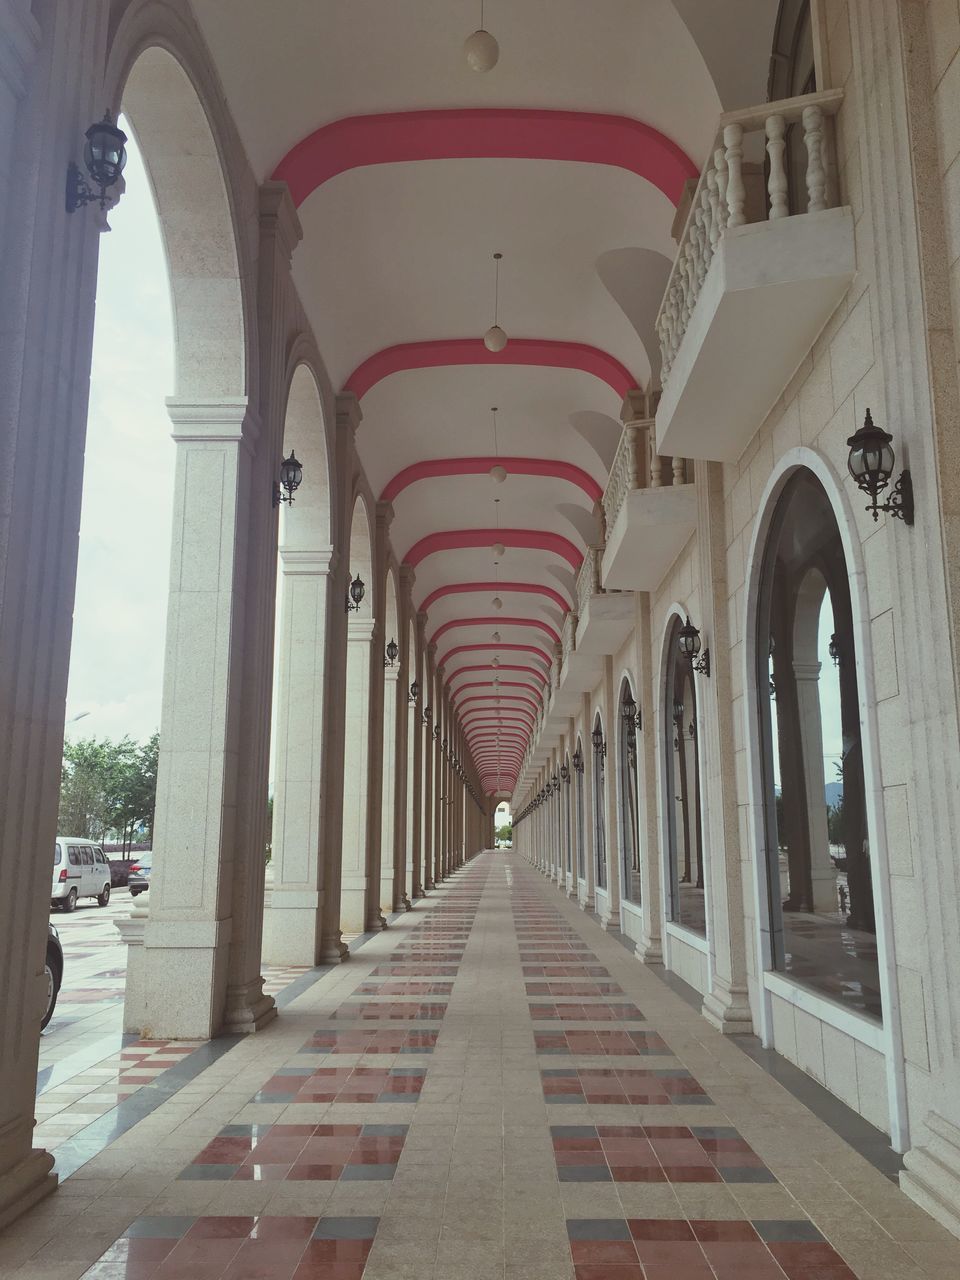 architecture, built structure, the way forward, arch, diminishing perspective, architectural column, in a row, vanishing point, column, day, city, walkway, building, outdoors, no people, empty, long, narrow, travel destinations